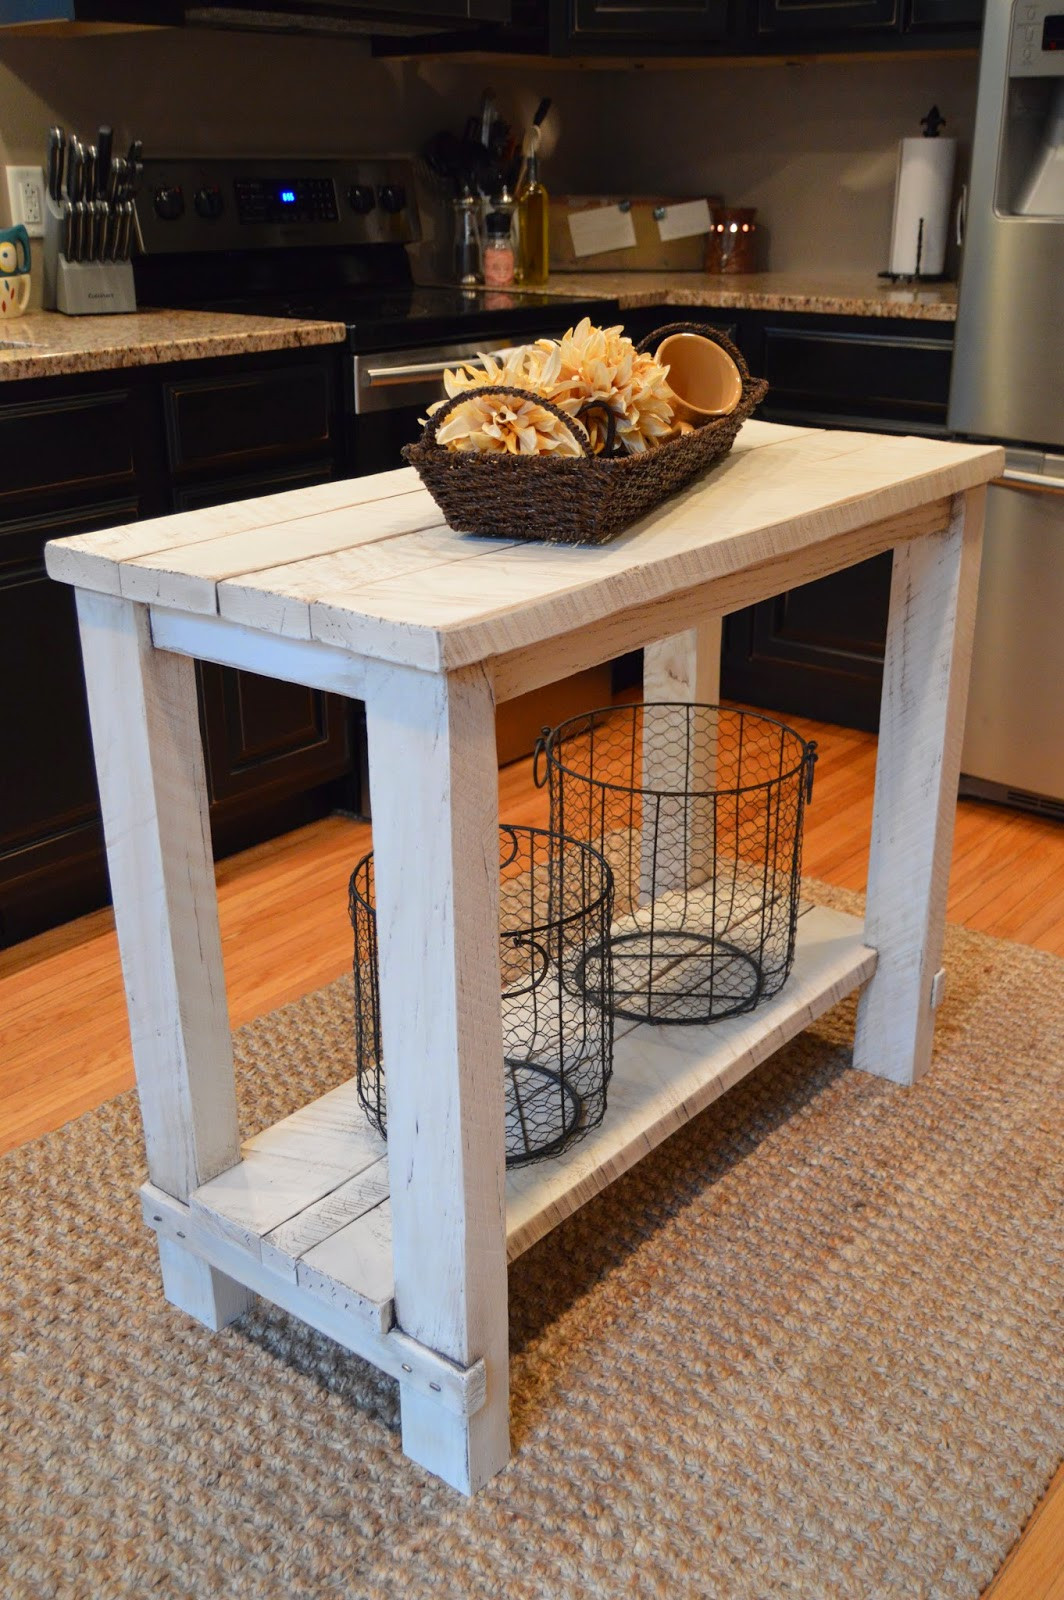 Diy Small Kitchen island Awesome 15 Gorgeous Diy Kitchen islands for Every Bud